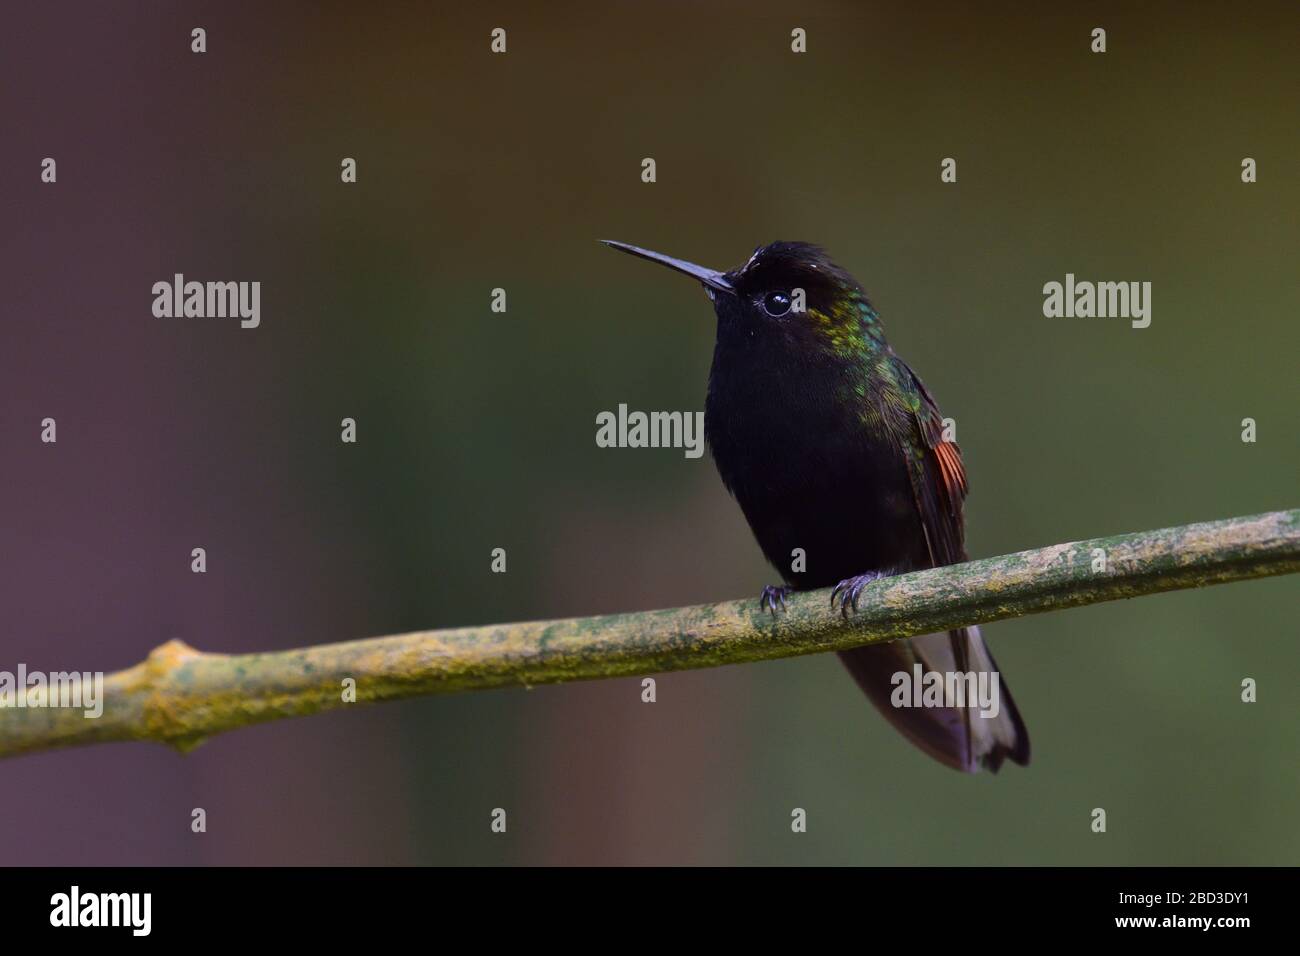 Black-bellied Hummingbird in Costa Rica Cloud forest Stock Photo